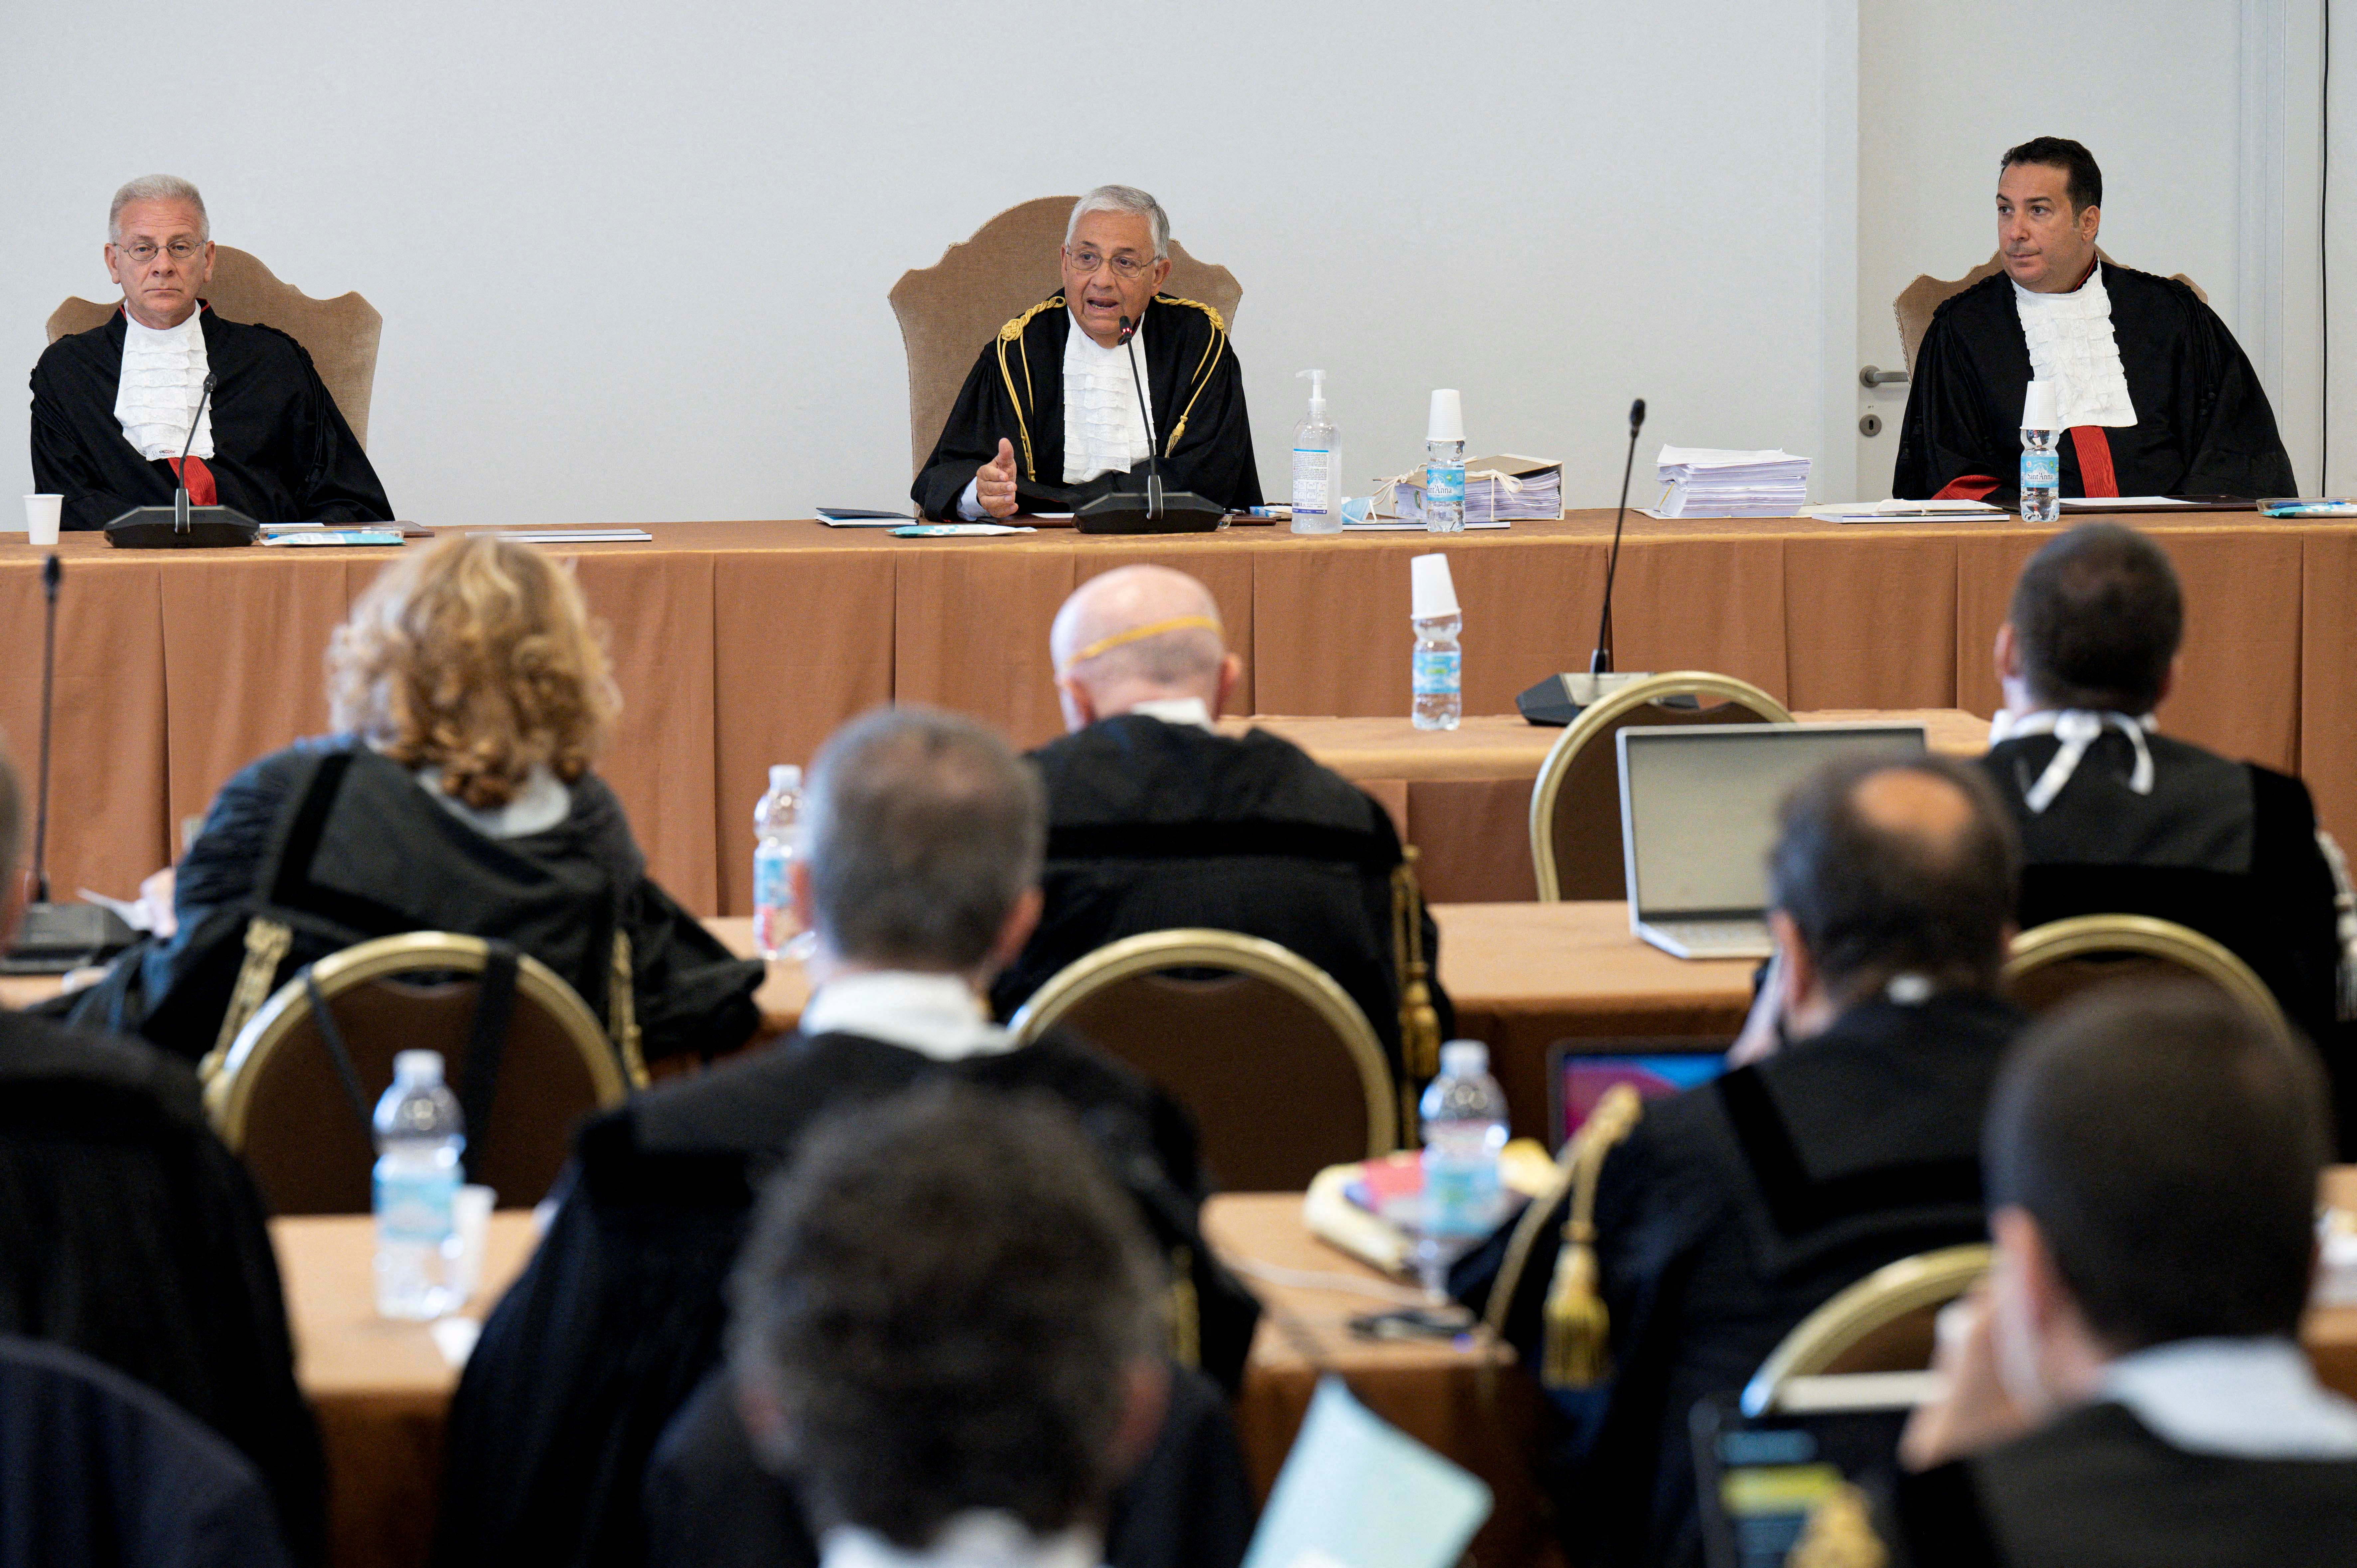 The Italian cardinal has been charged with 9 other people in this trial that since July 2021 has attempted to clarify alleged wrongdoing at the Vatican State Secretariat (Vatican Media/Handout via REUTERS)